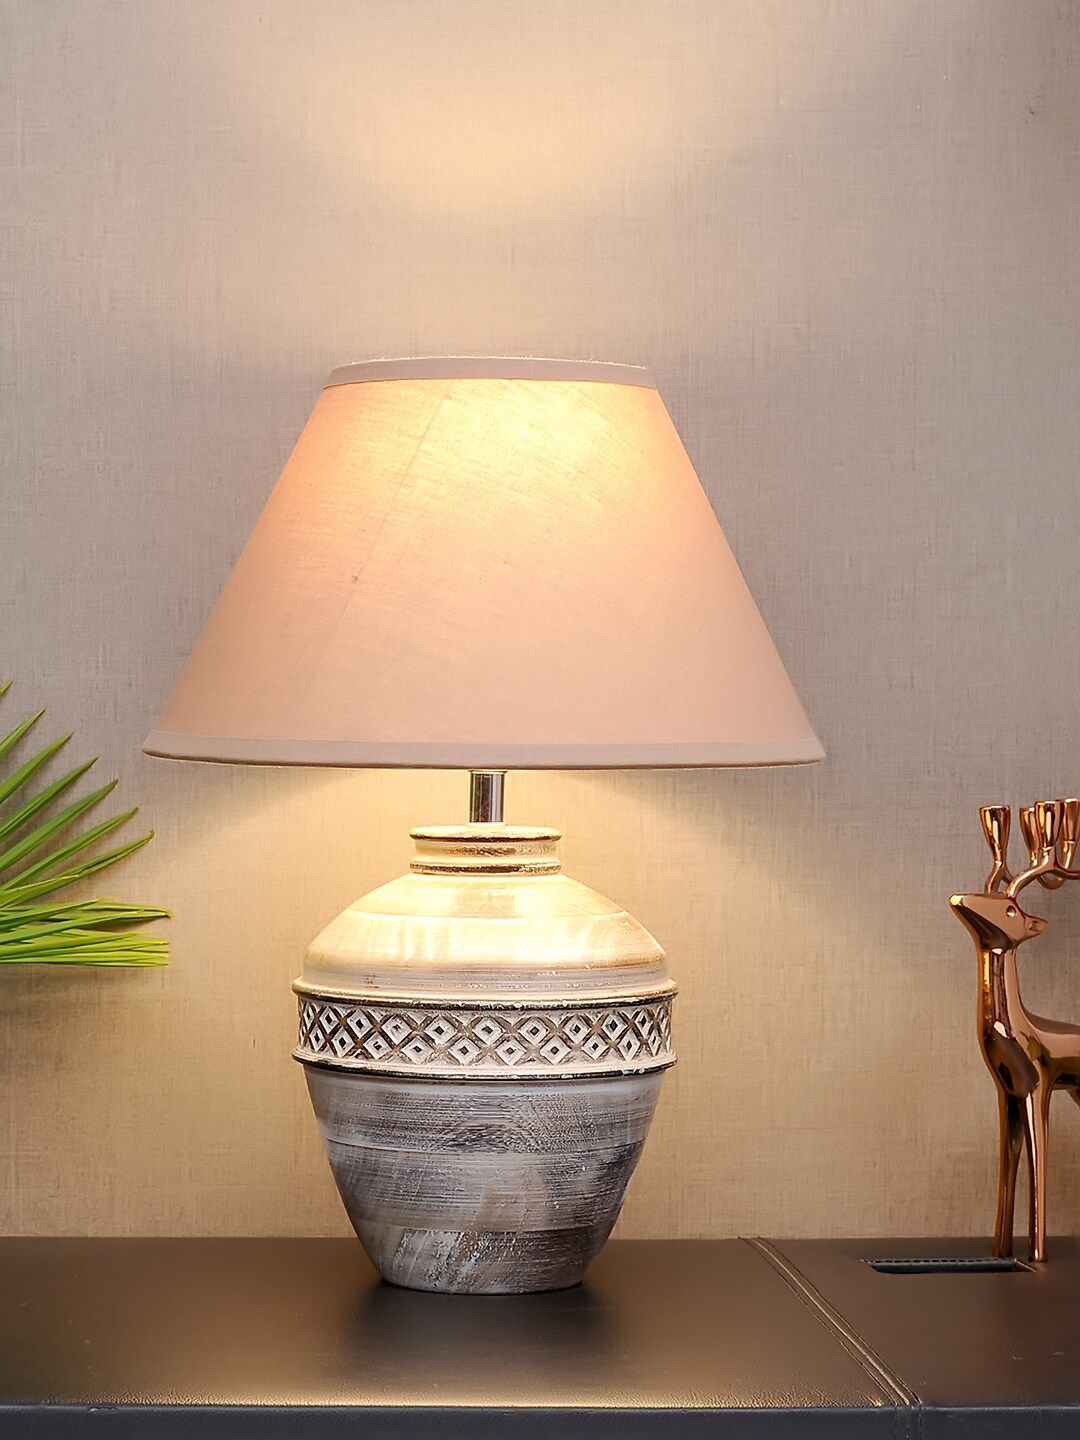 THE LIGHT STORE White Self Design Bedside Standard Lamp With Shade Price in India